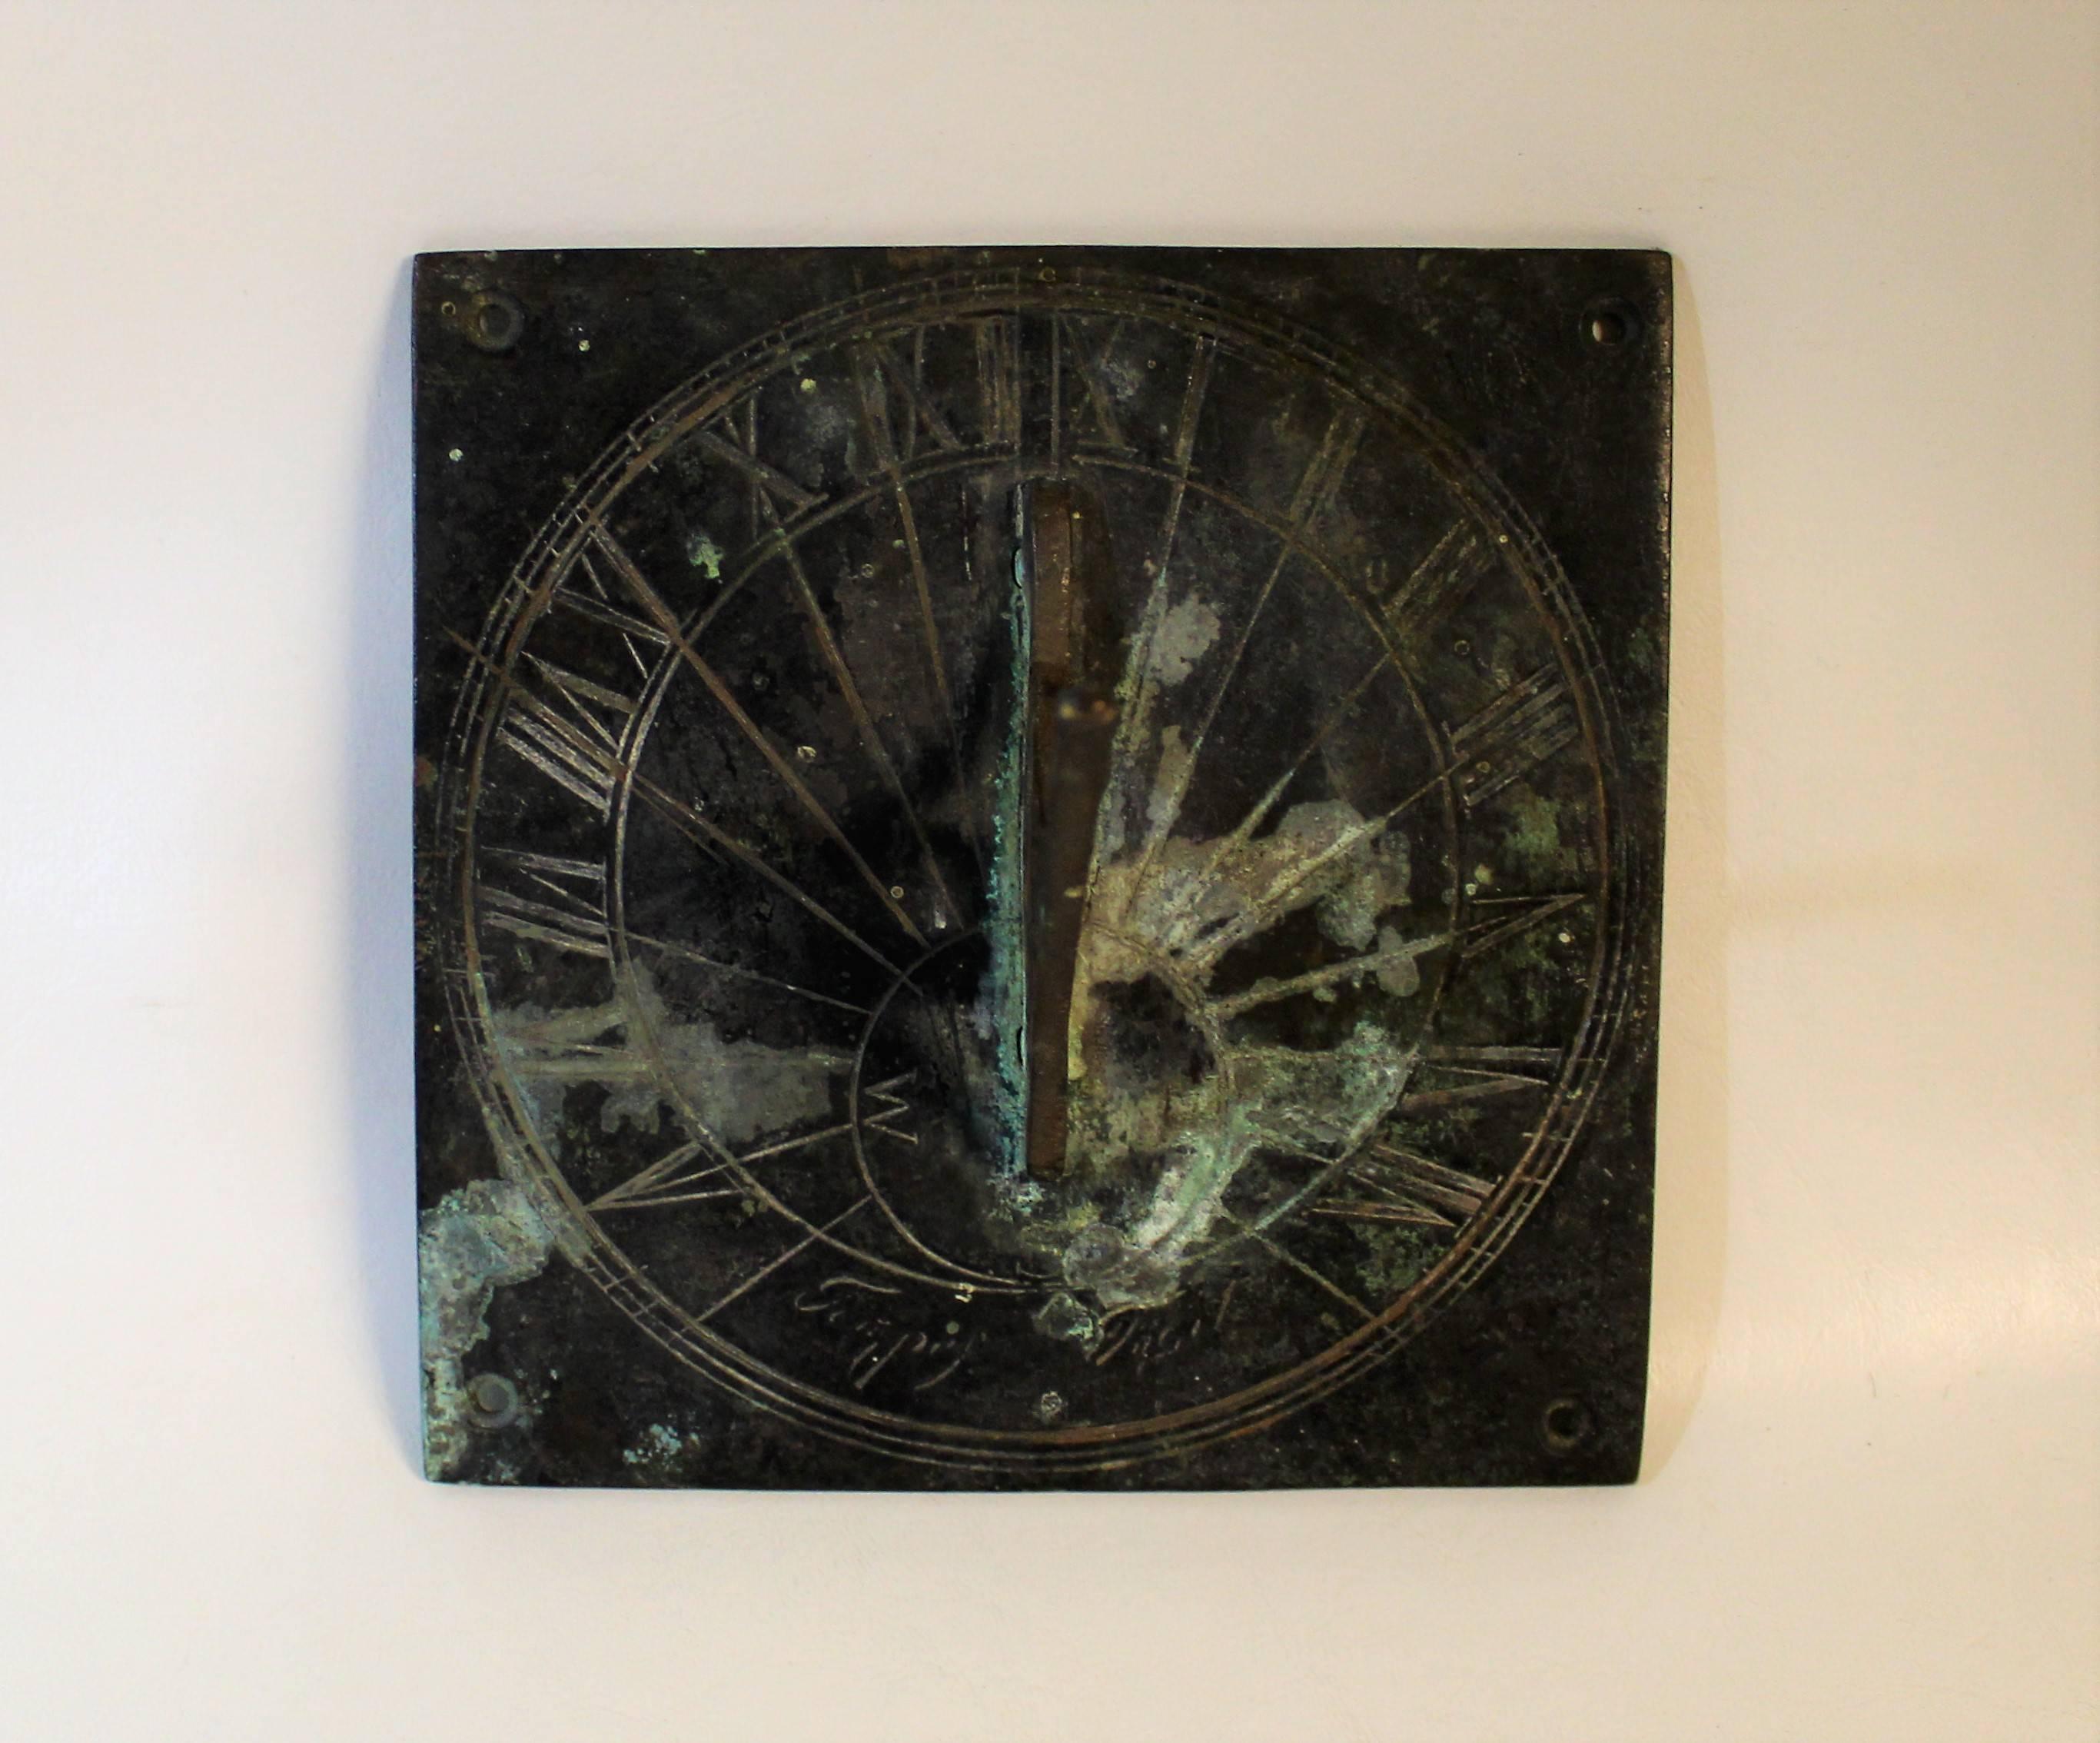 19th century bronze sundial with text and roman numerals and beautiful aged patina.